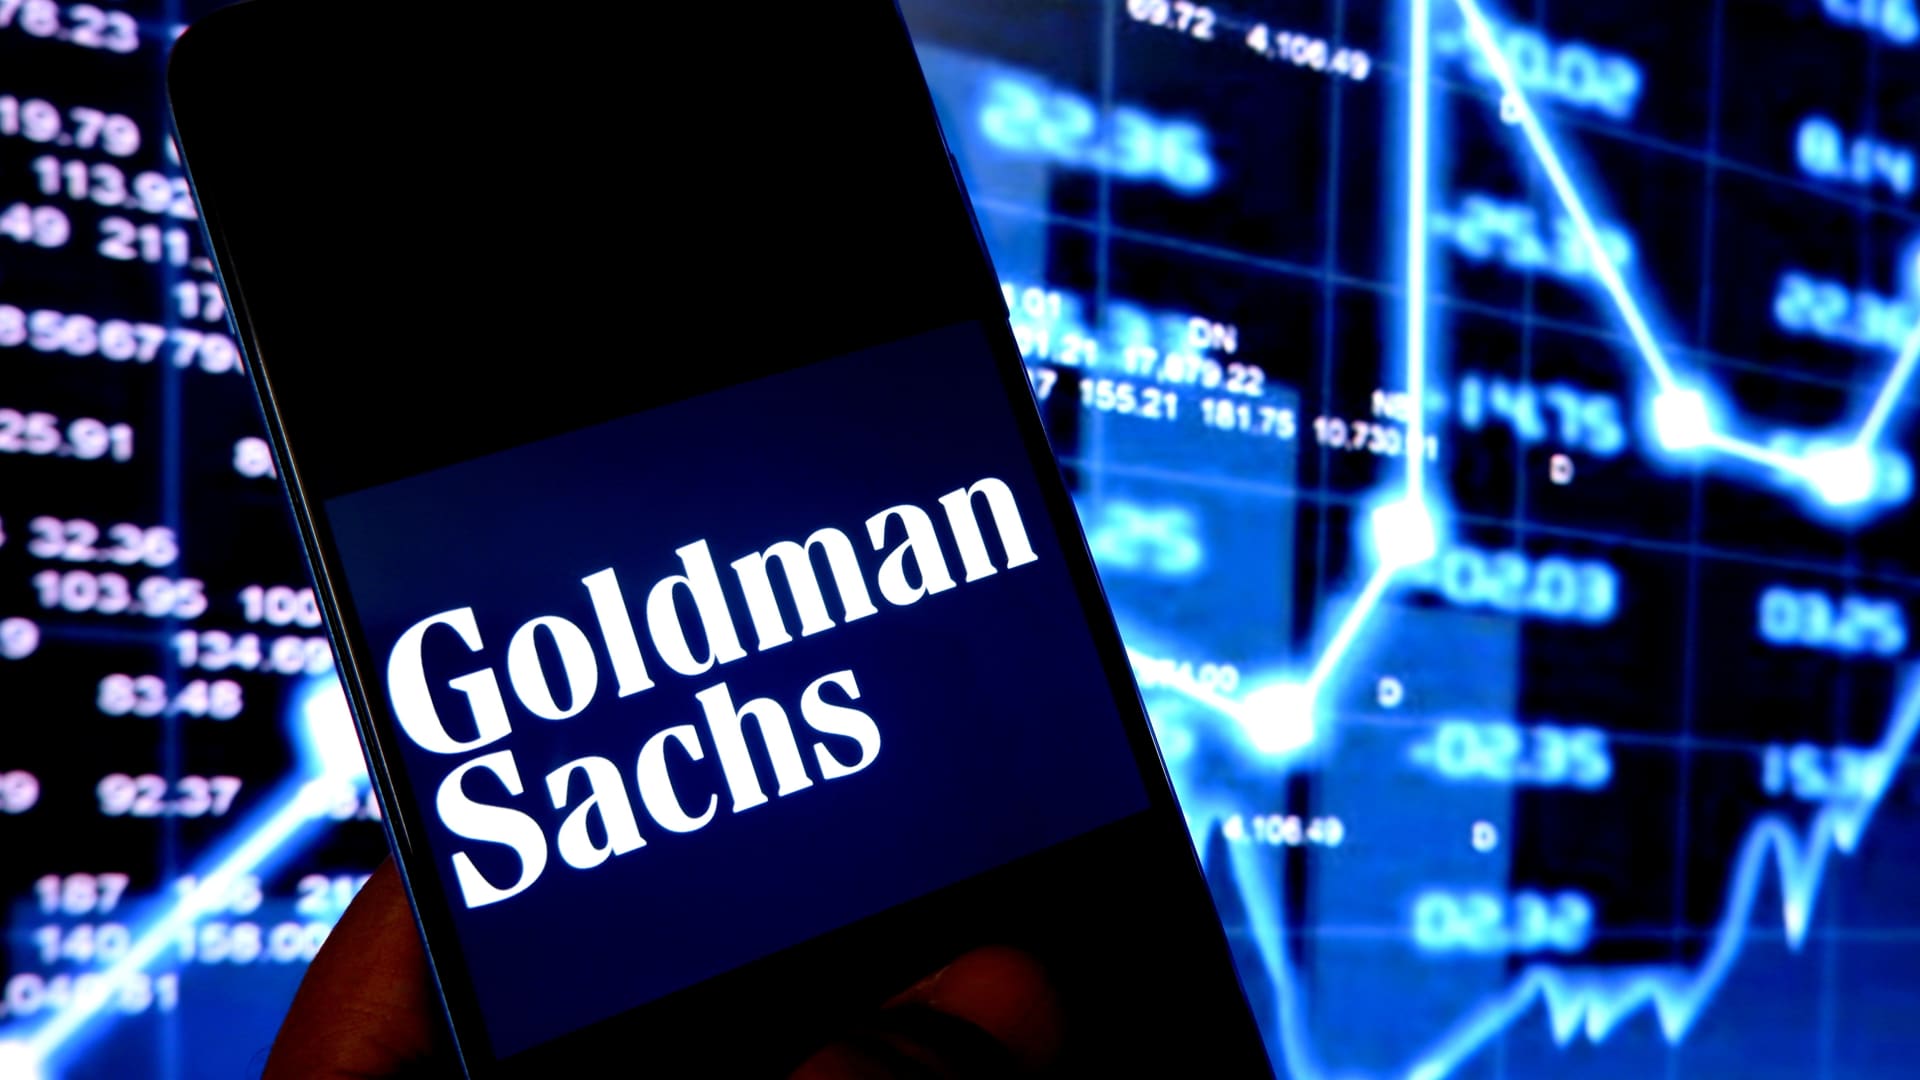 SEC fines Goldman Sachs $6 million over inaccurate, incomplete trading information